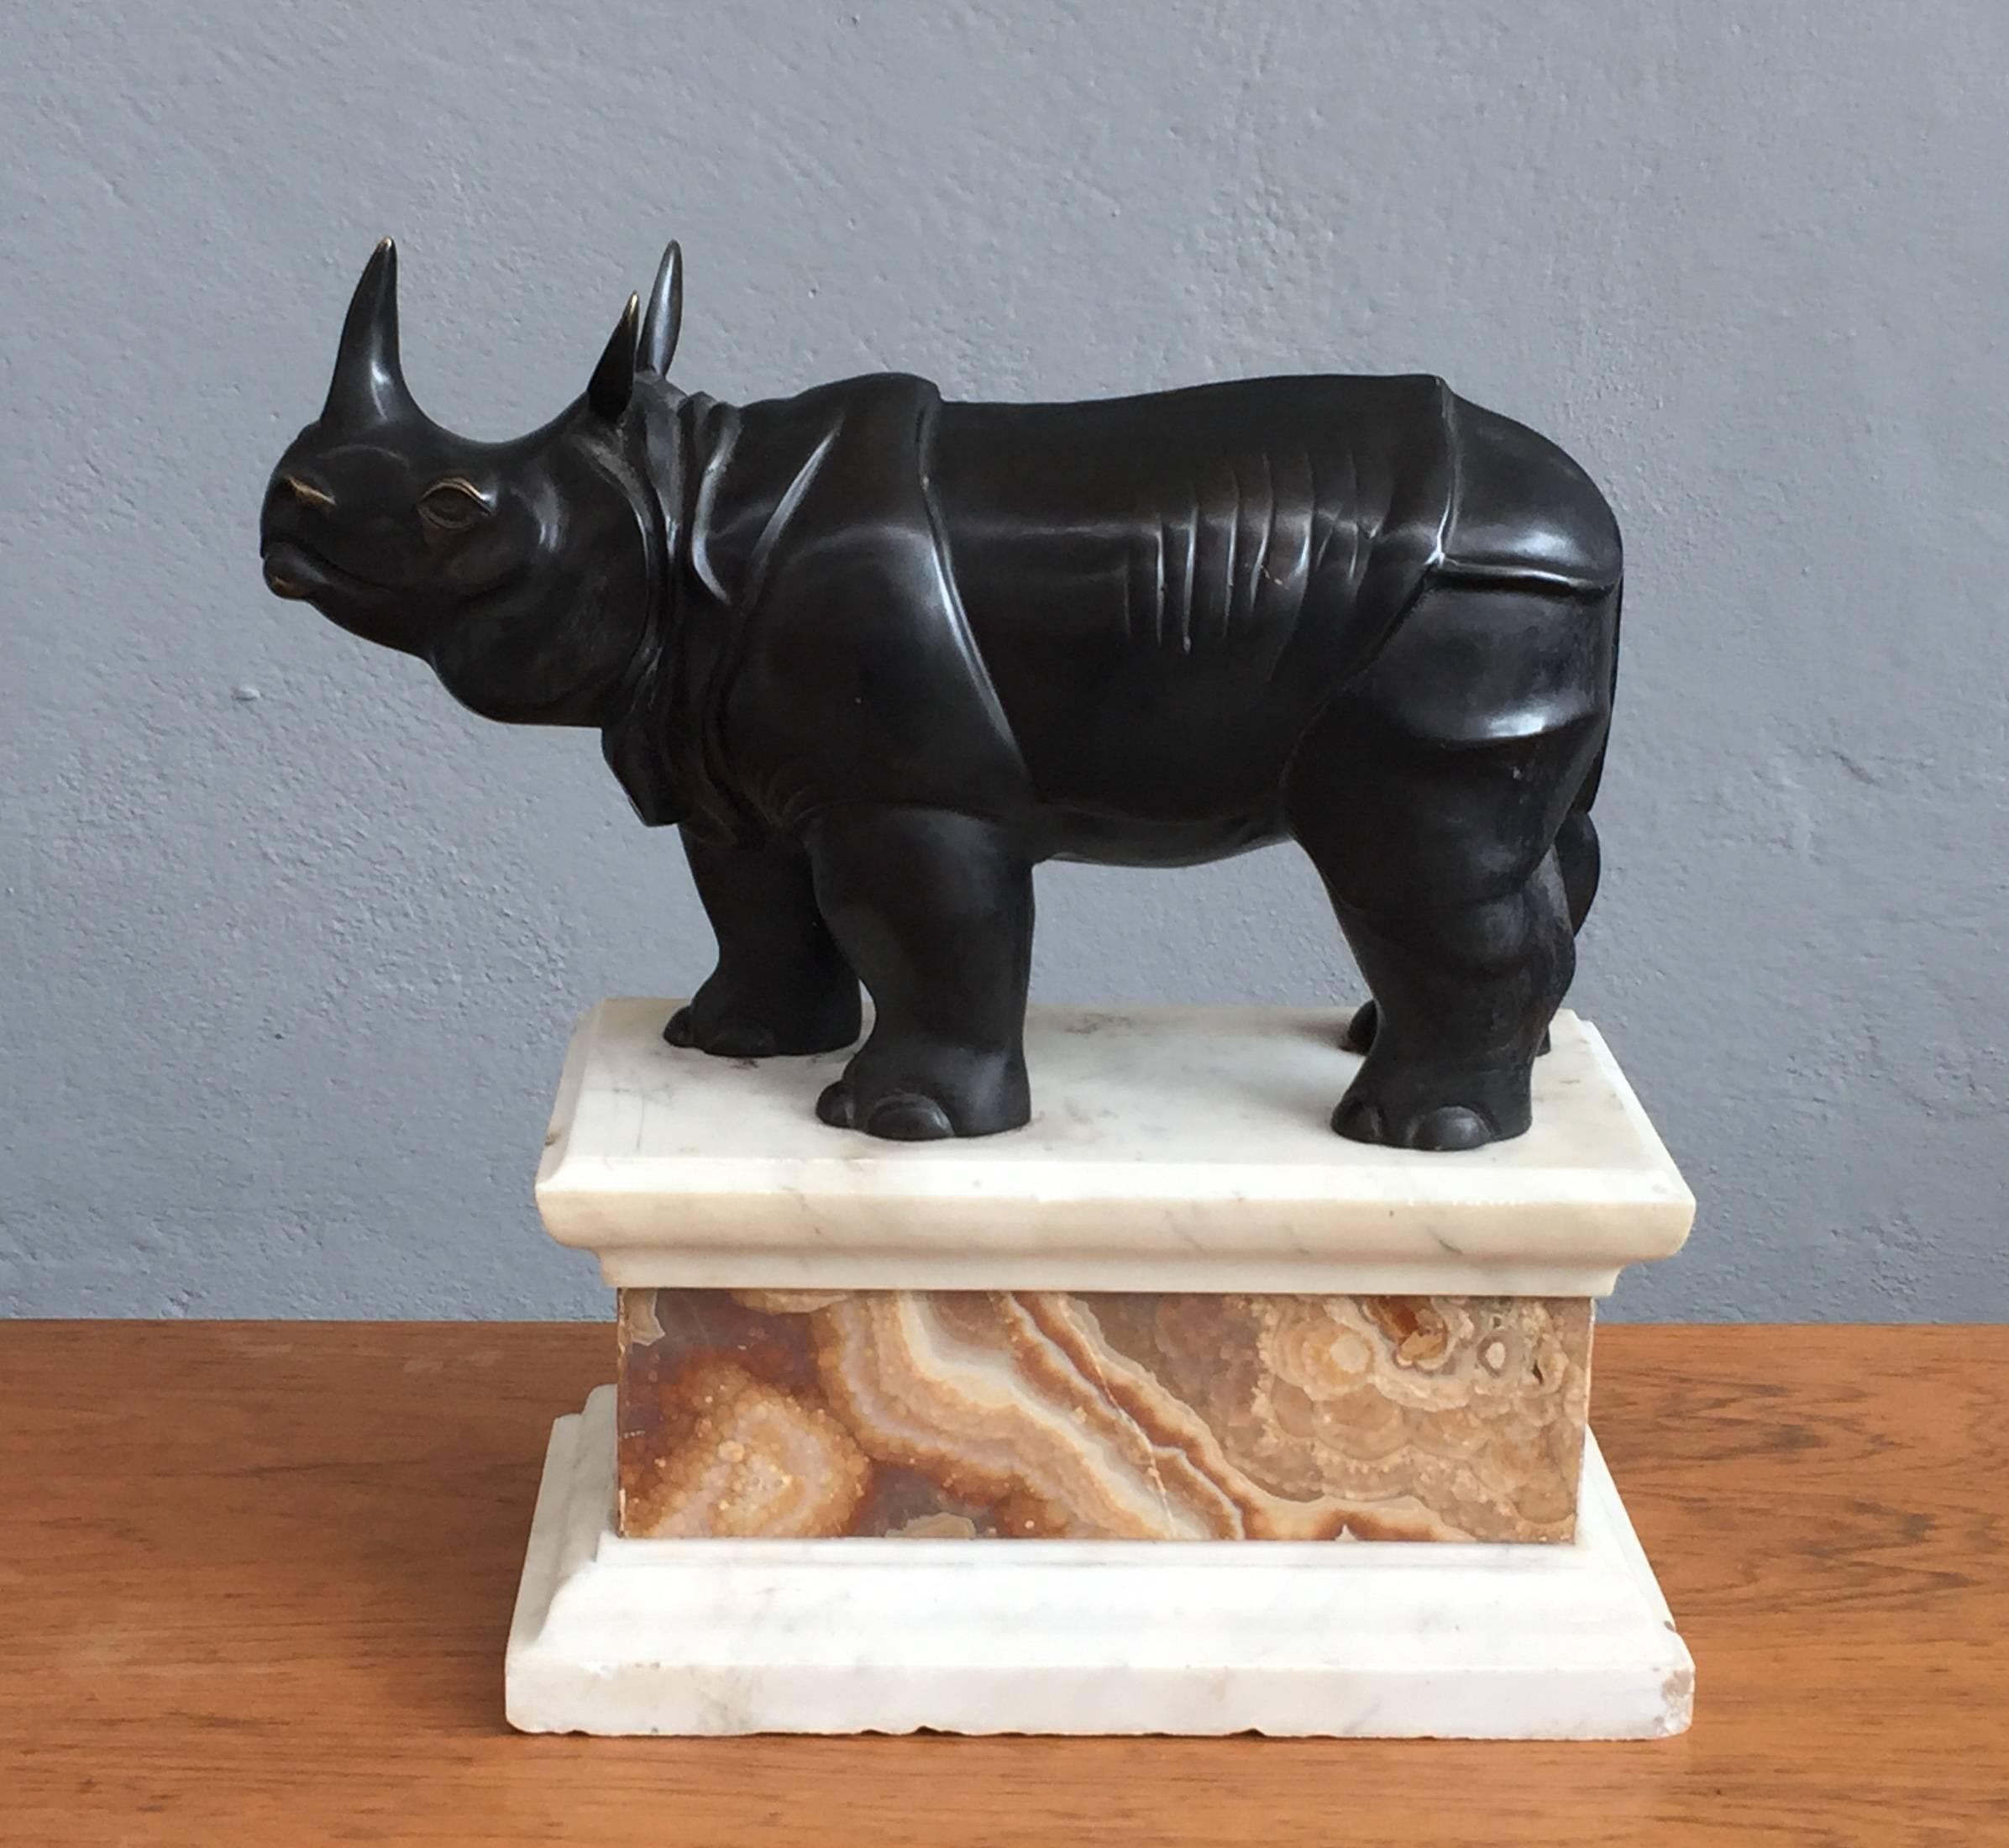 Marble base for this bronze rhino.
Very charming and collectable solid bronze rhino.
Excellent bronze casting.